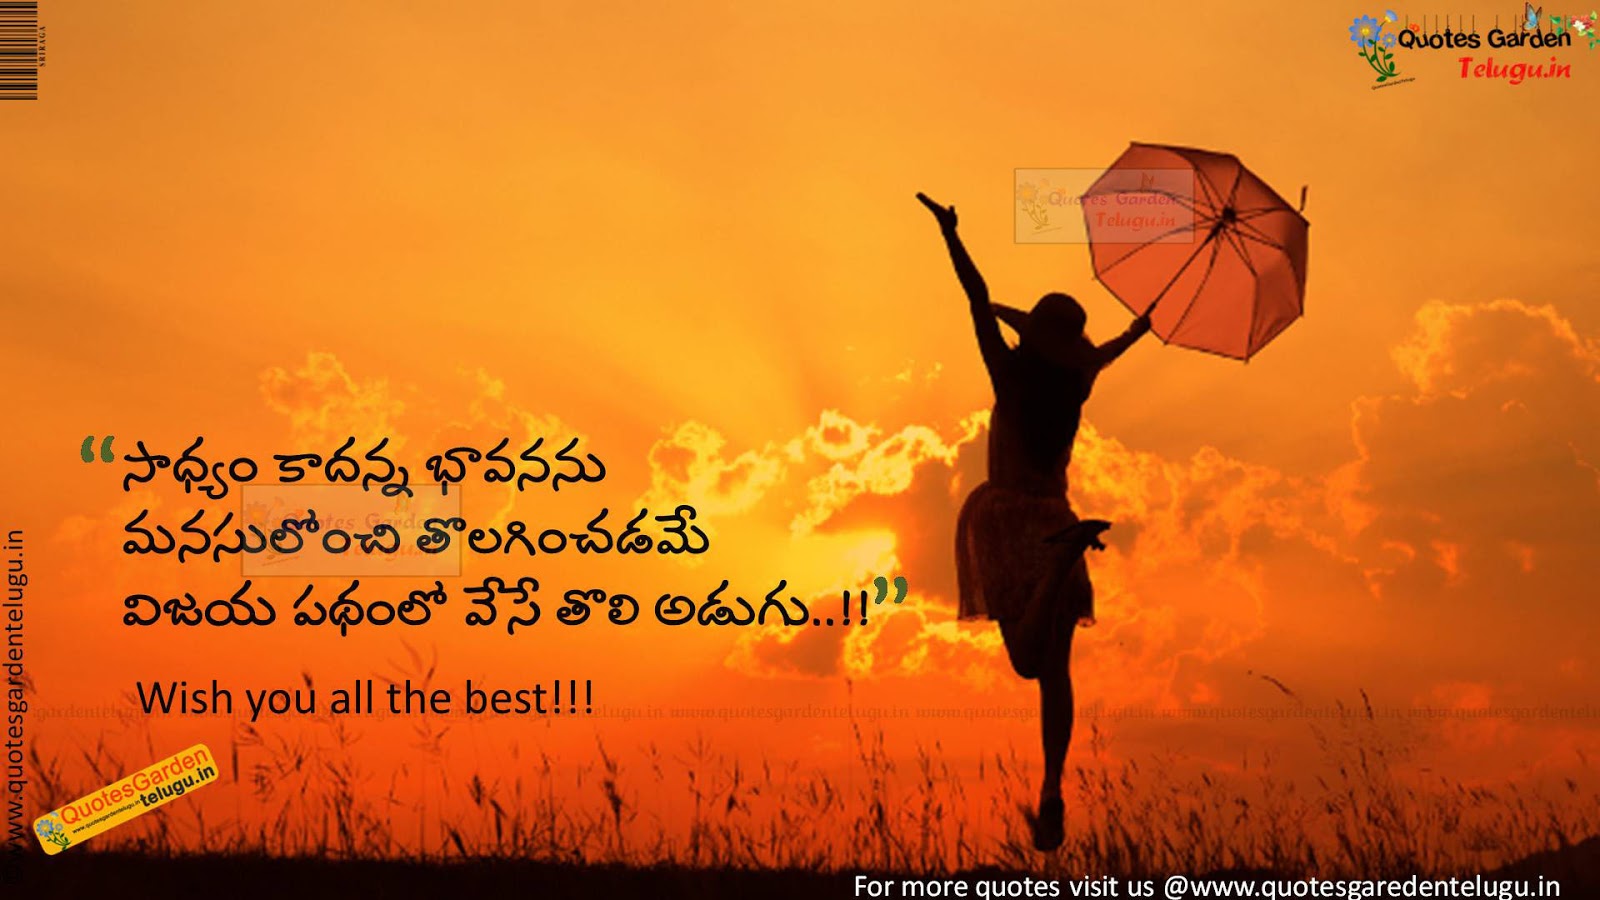 Best Wishes Quotes For Friends Future Wish you all the best quotes messages in telugu